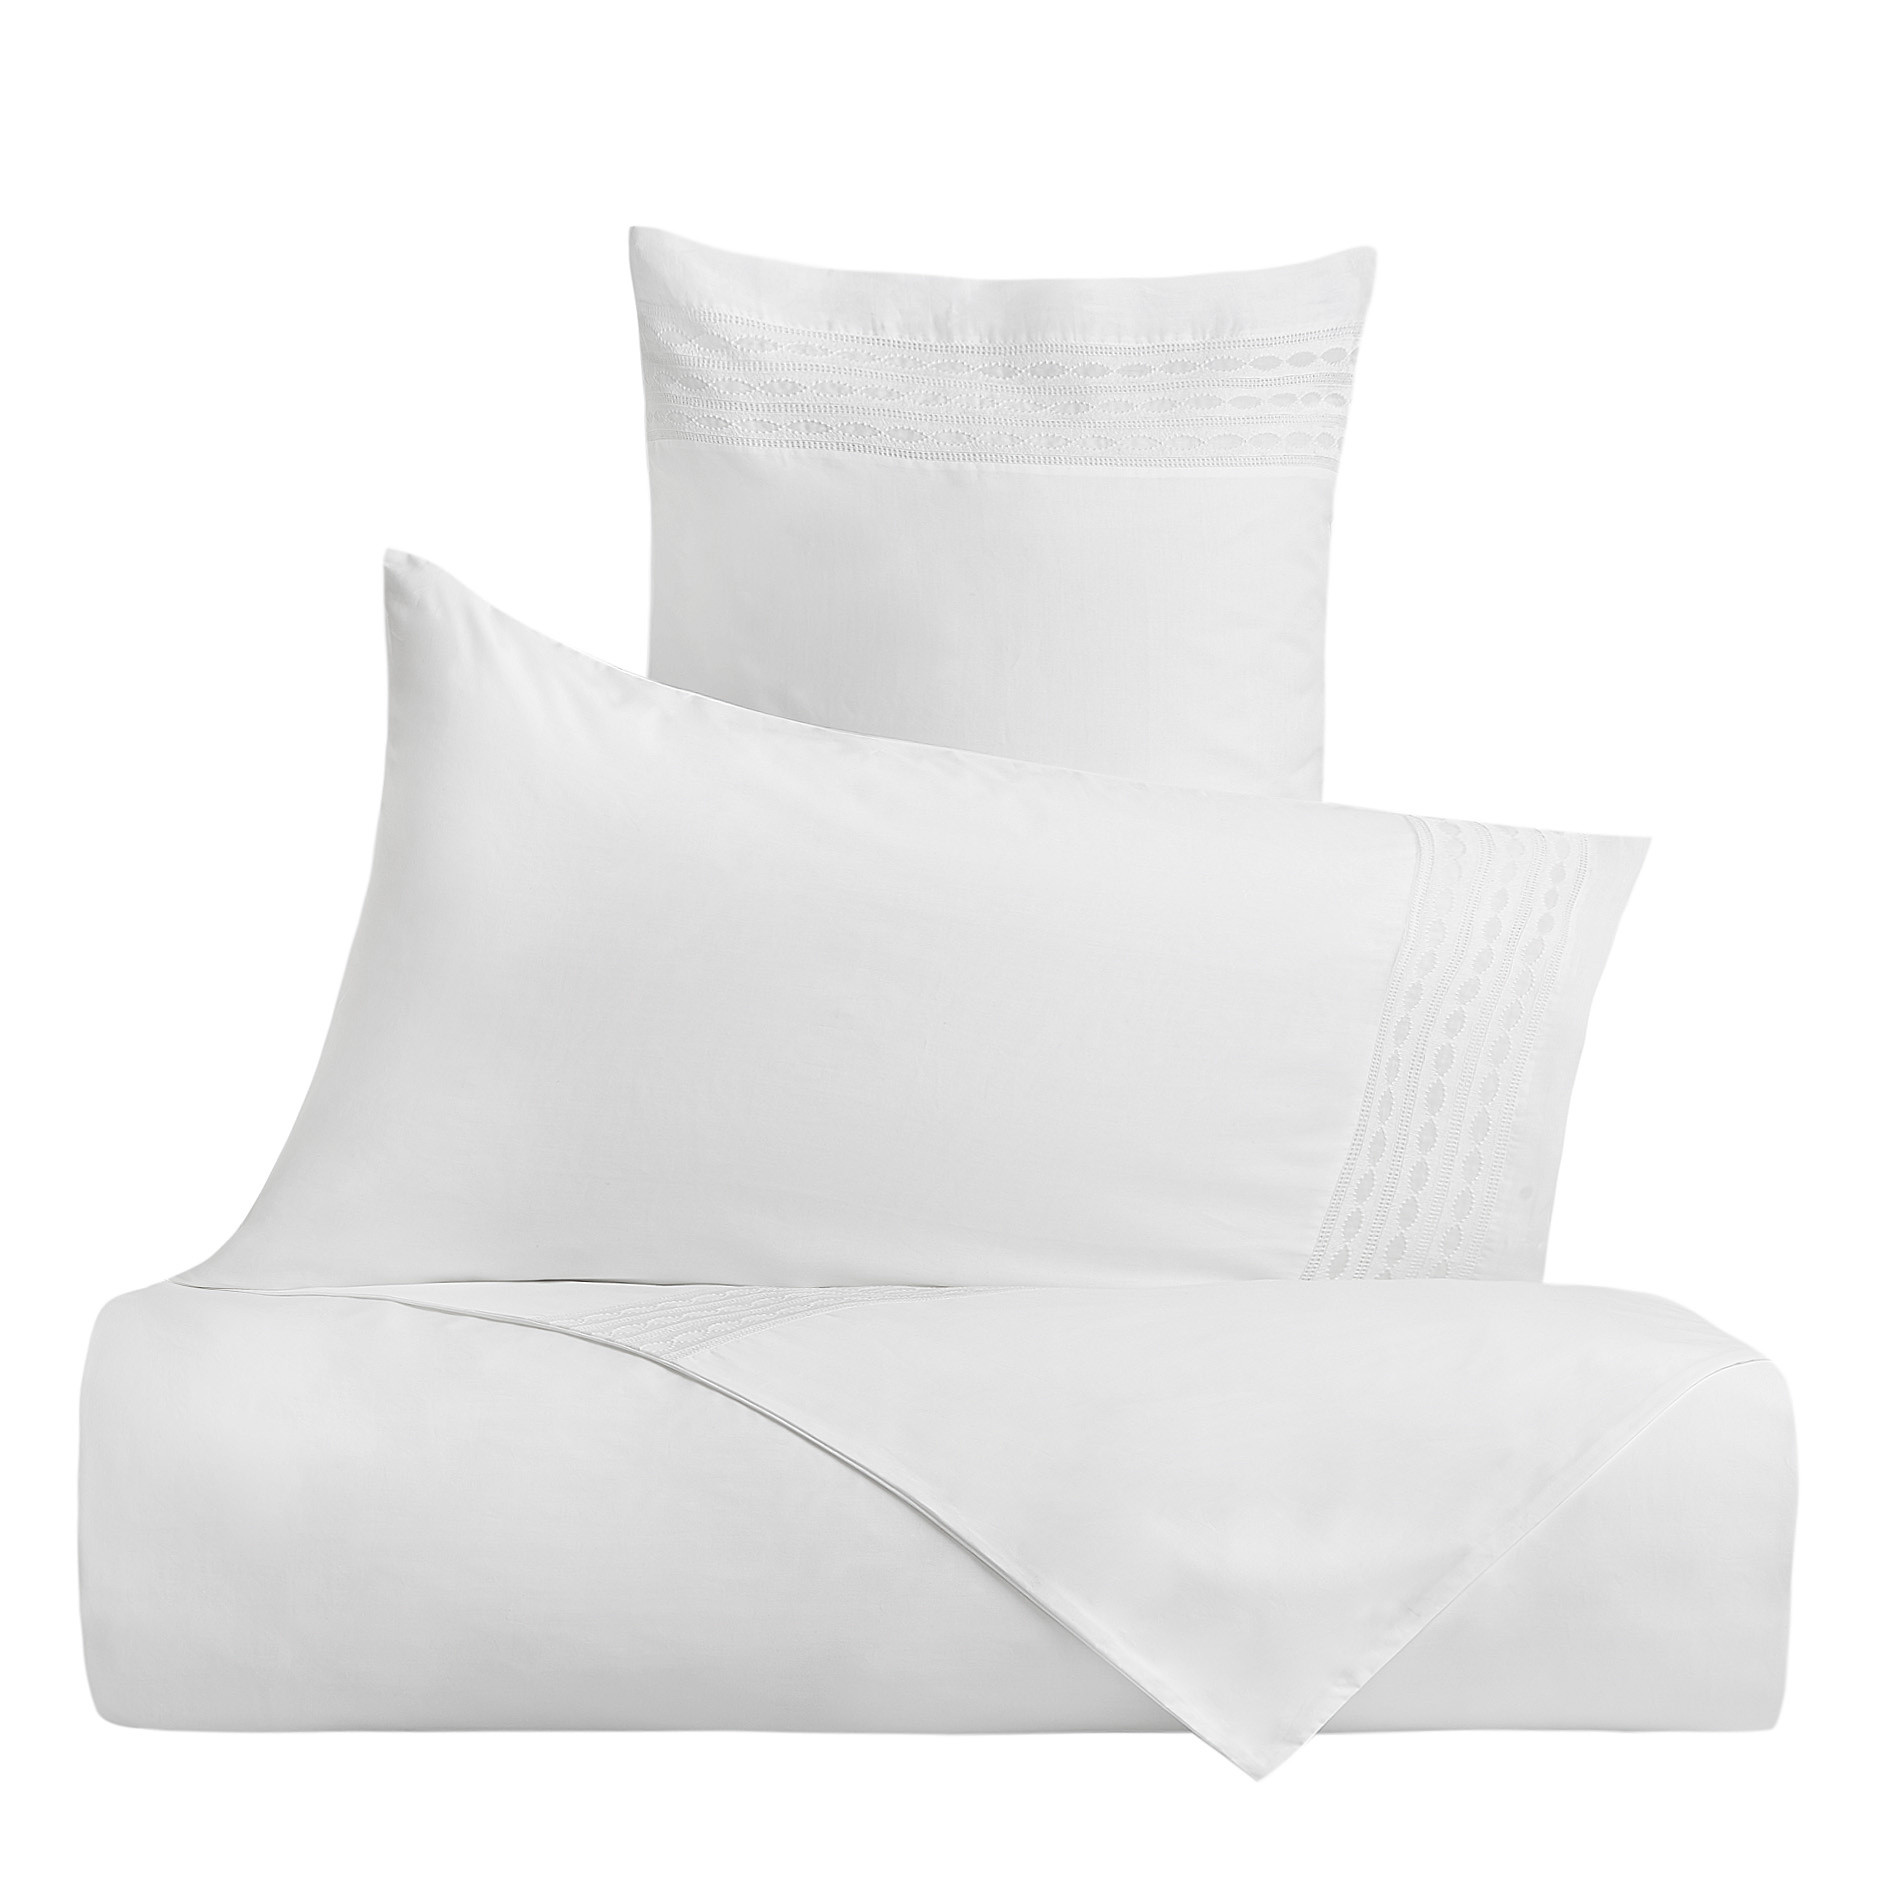 Portofino 100% cotton duvet cover with embroidered trim, White, large image number 0